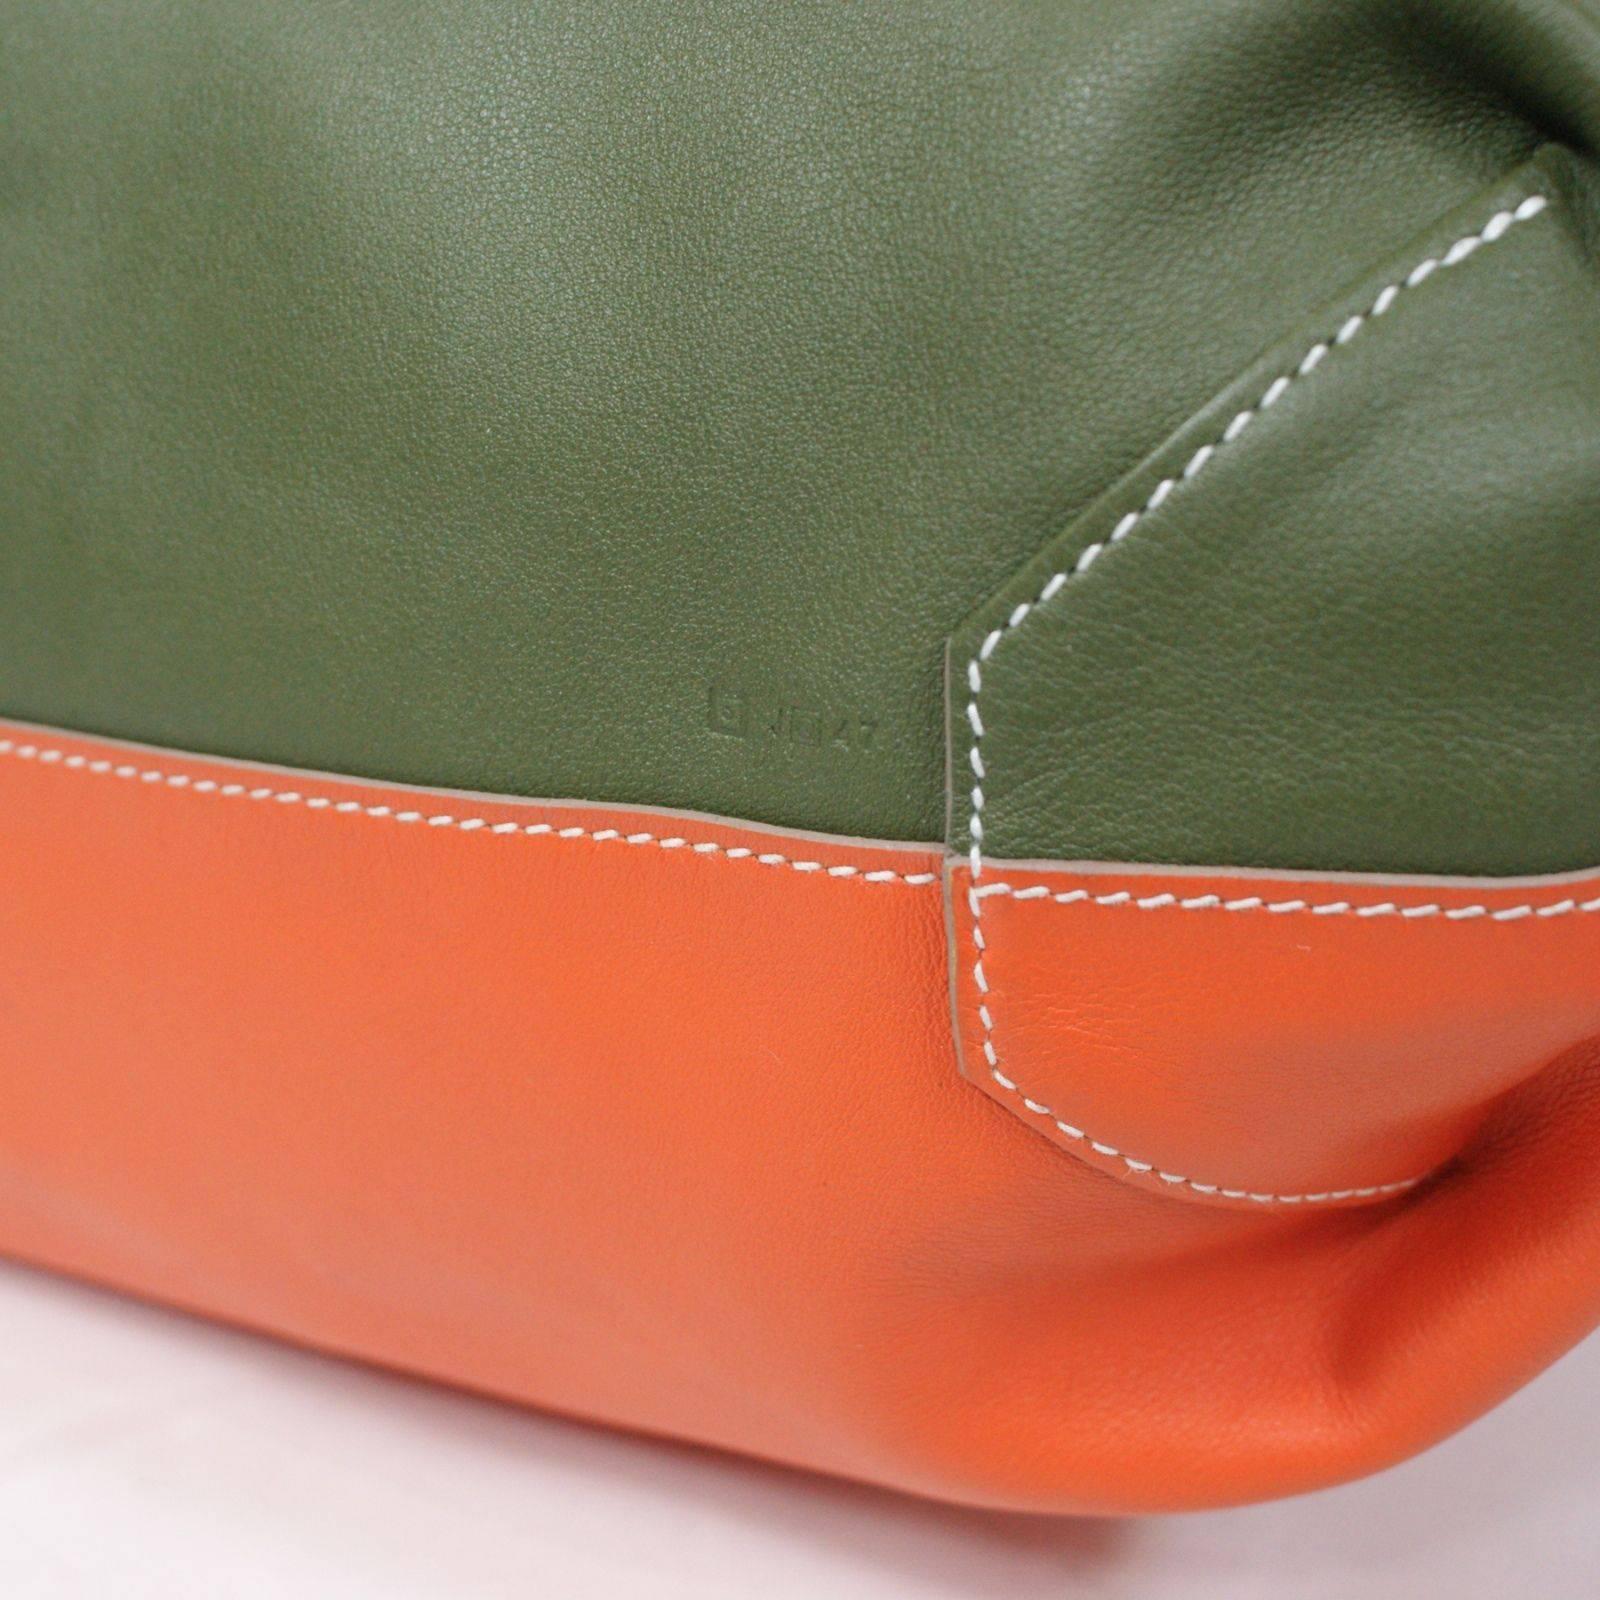 Color Block Leather Tote
Grey, Blue, Green and Orange
Reversible
Originally $3825.00
Excellent Condition